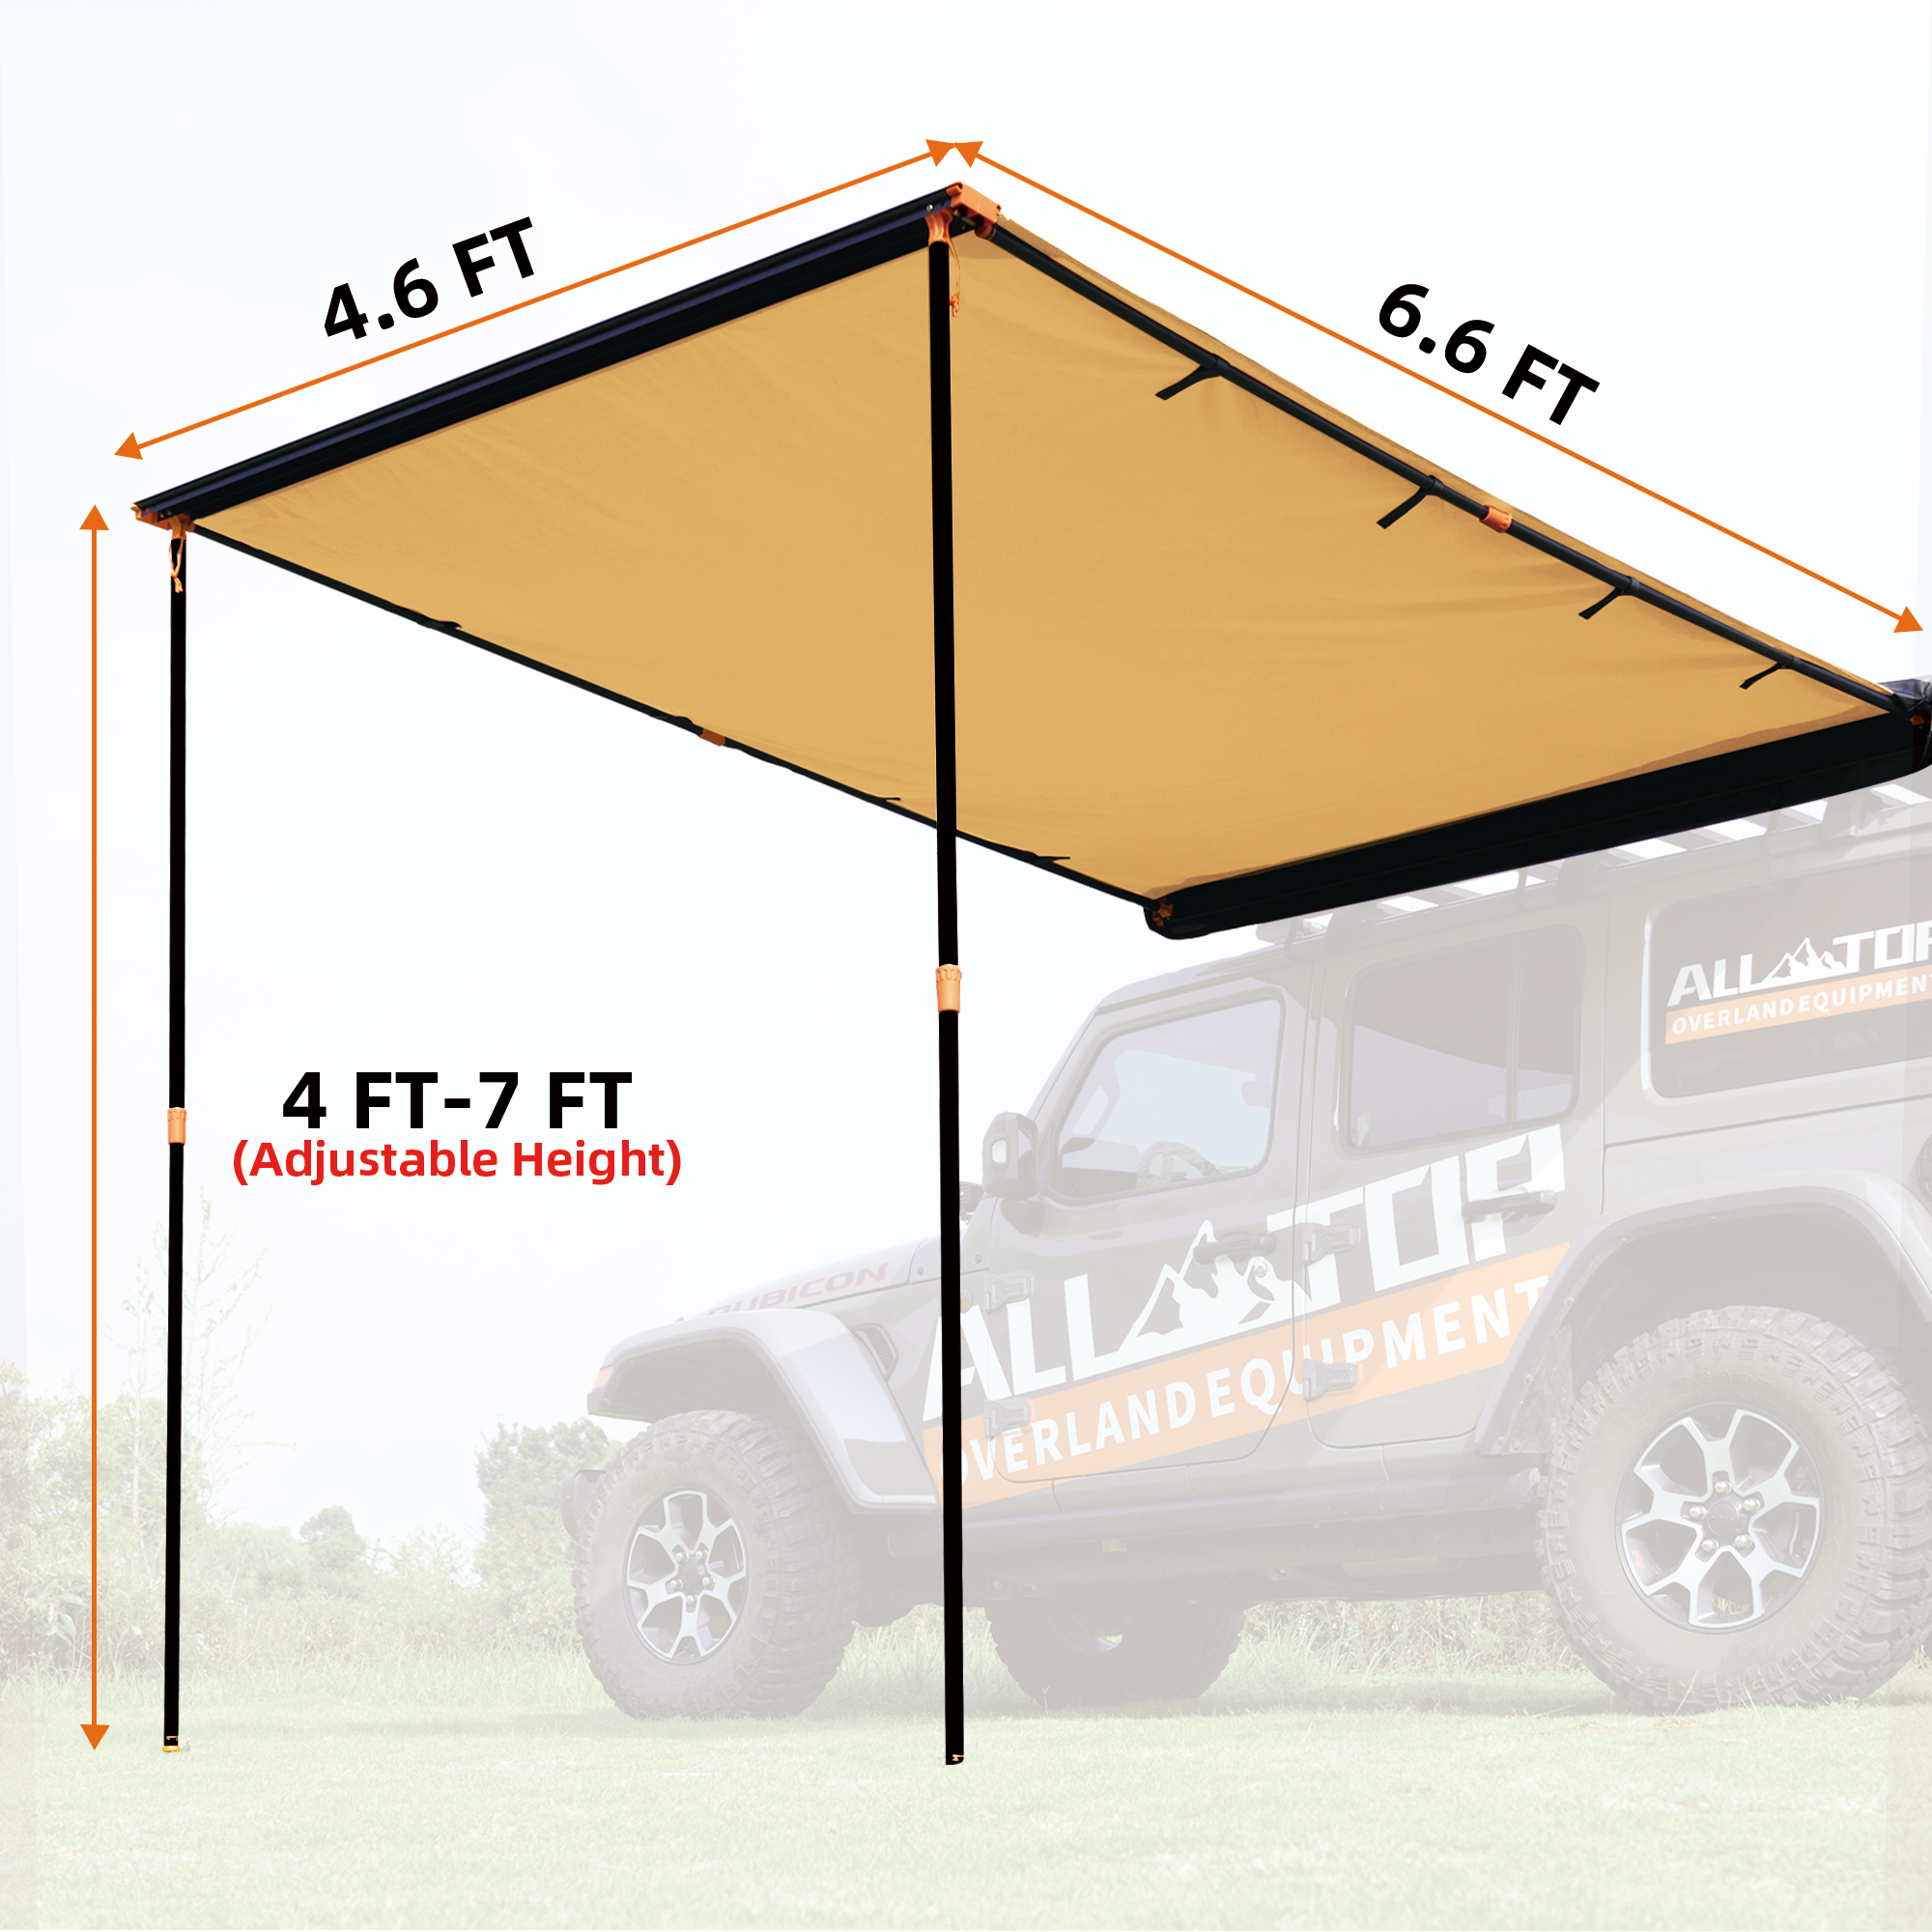 Rooftop Vehicle Awning - 4.6ft x 6.6ft-3